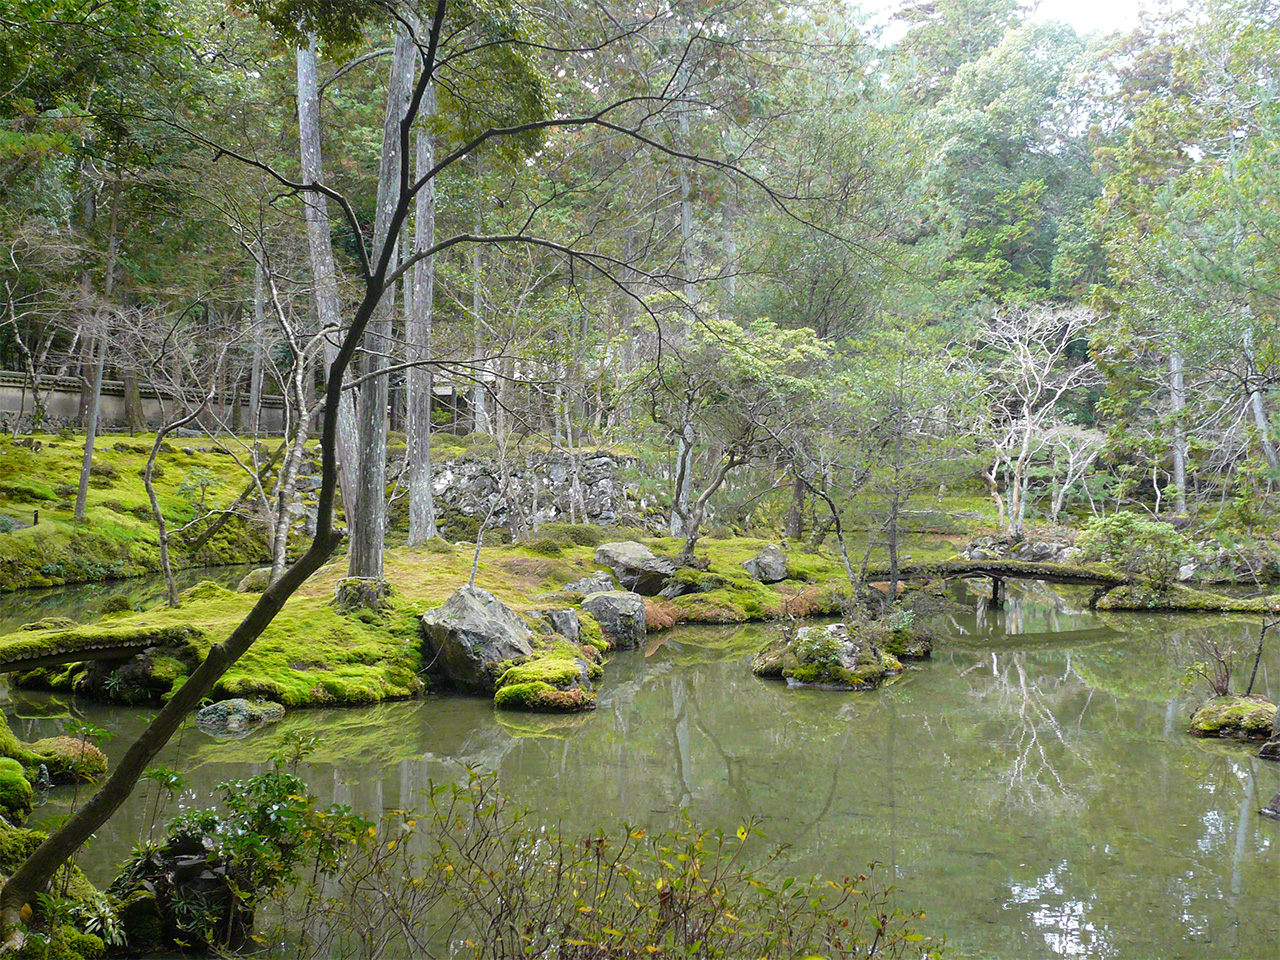 The temple garden at Saihōji, Kyoto. Takemitsu was particularly fond of this garden, and many of his compositions were inspired by the austere esthetics of Zen gardens.